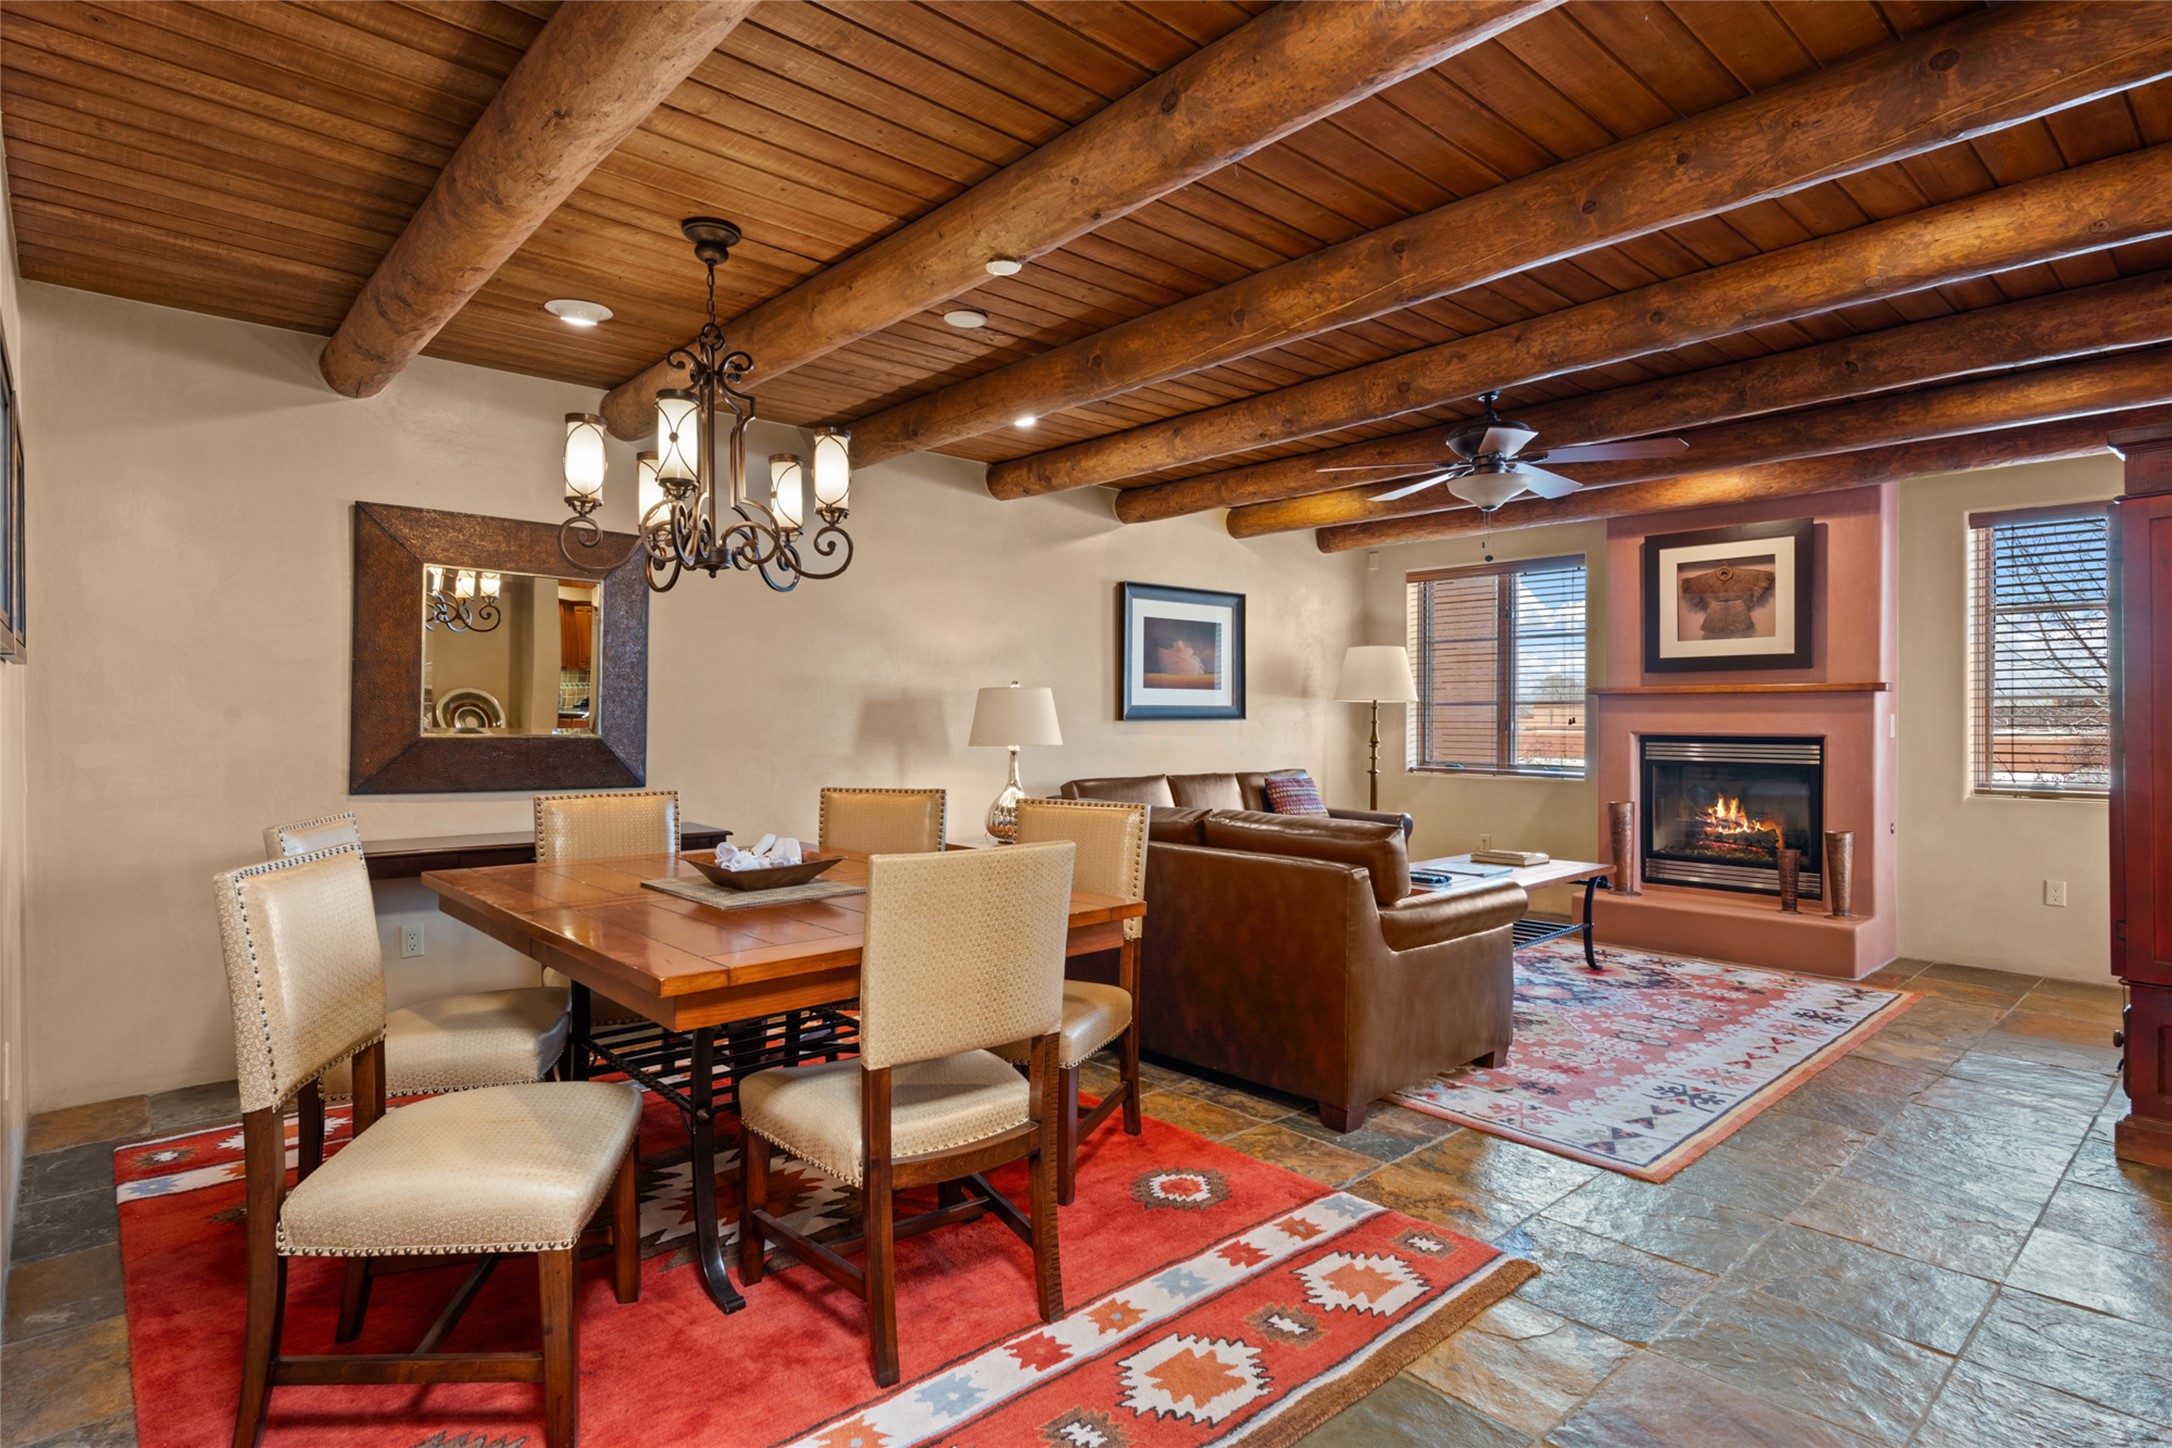 Step inside the condo and find the living area, featuring a lovely fireplace.